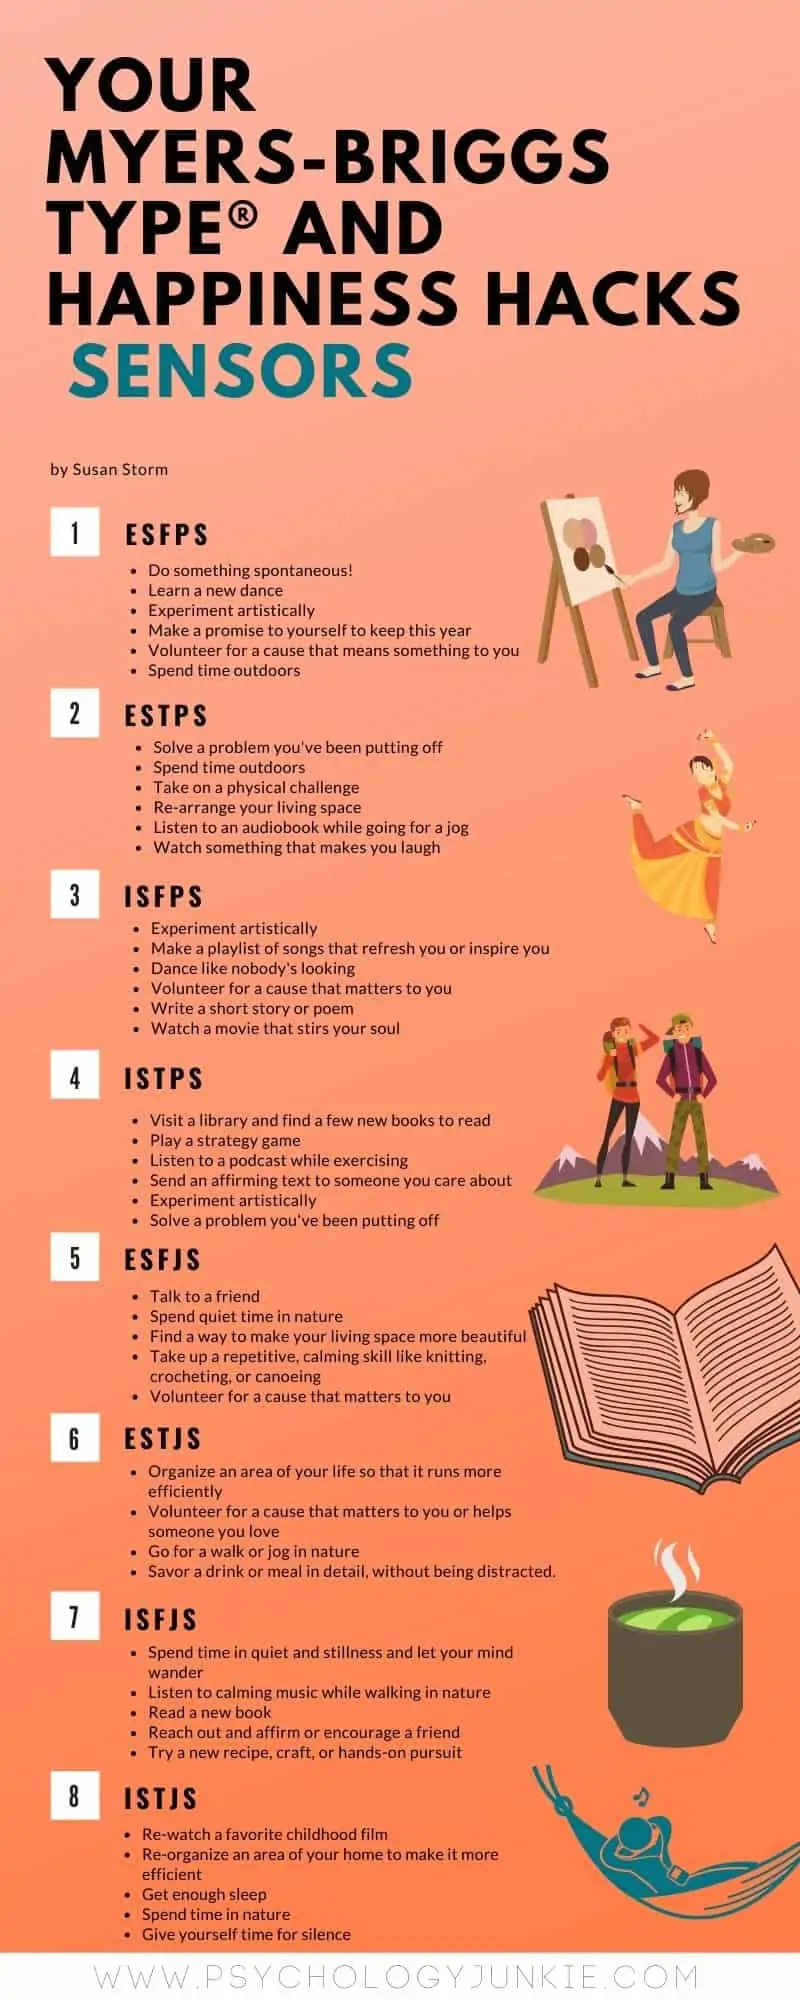 Discover some happiness hacks for the sensing Myers-Briggs personality types. #MBTI #Personality